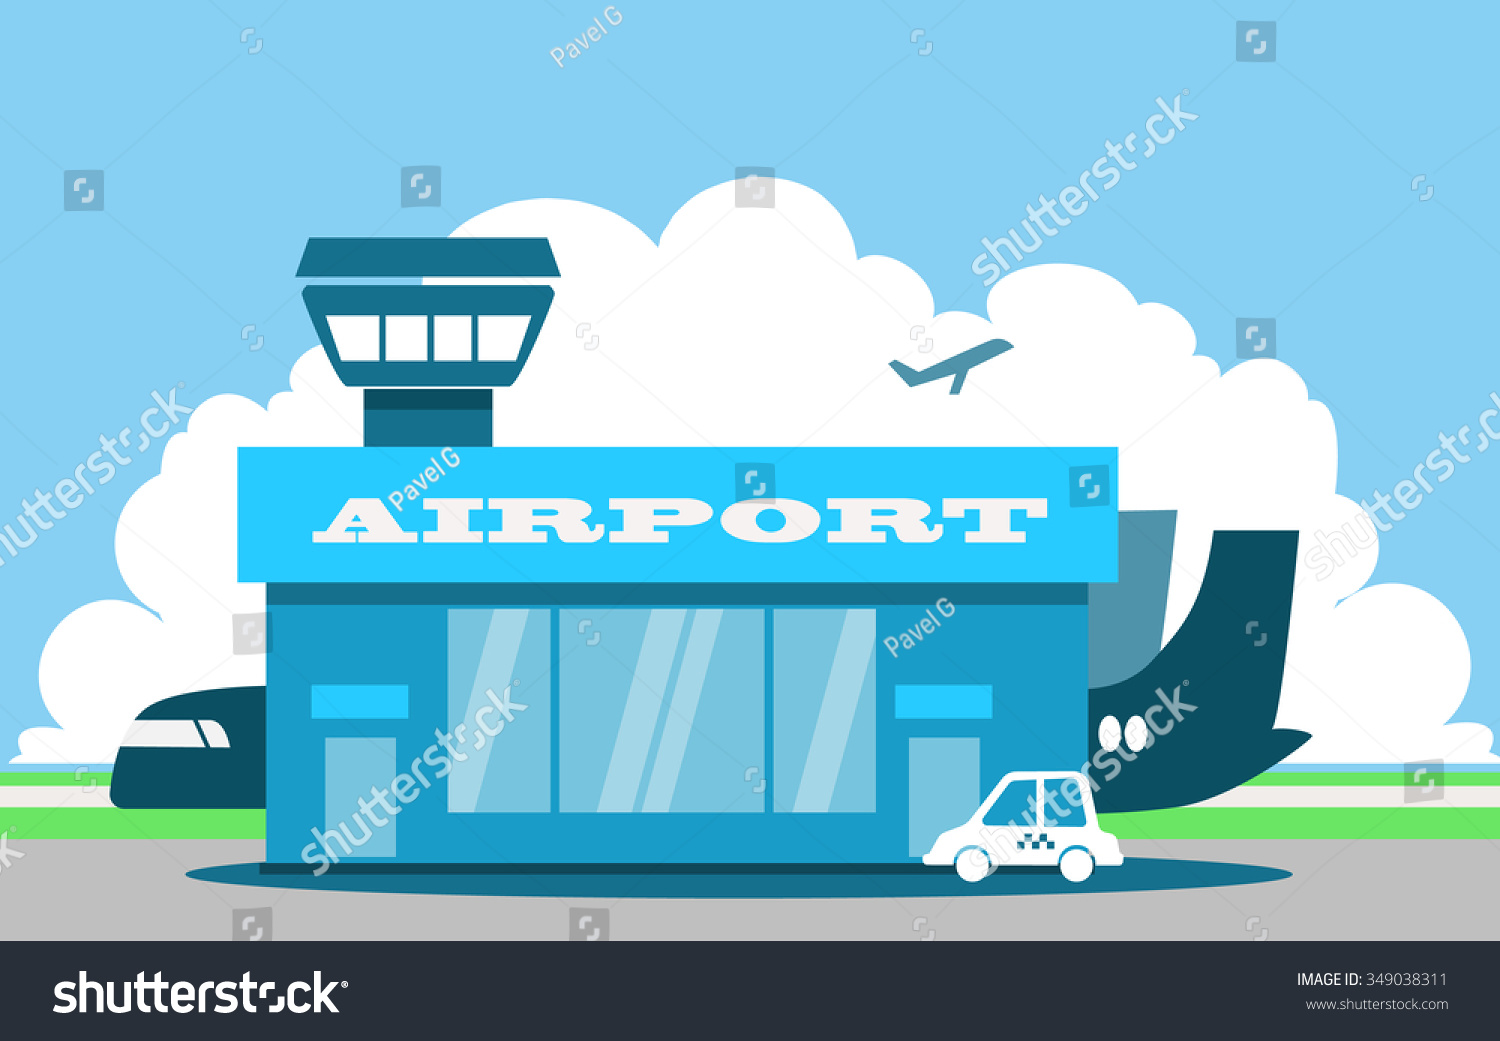 airport building clipart - photo #40